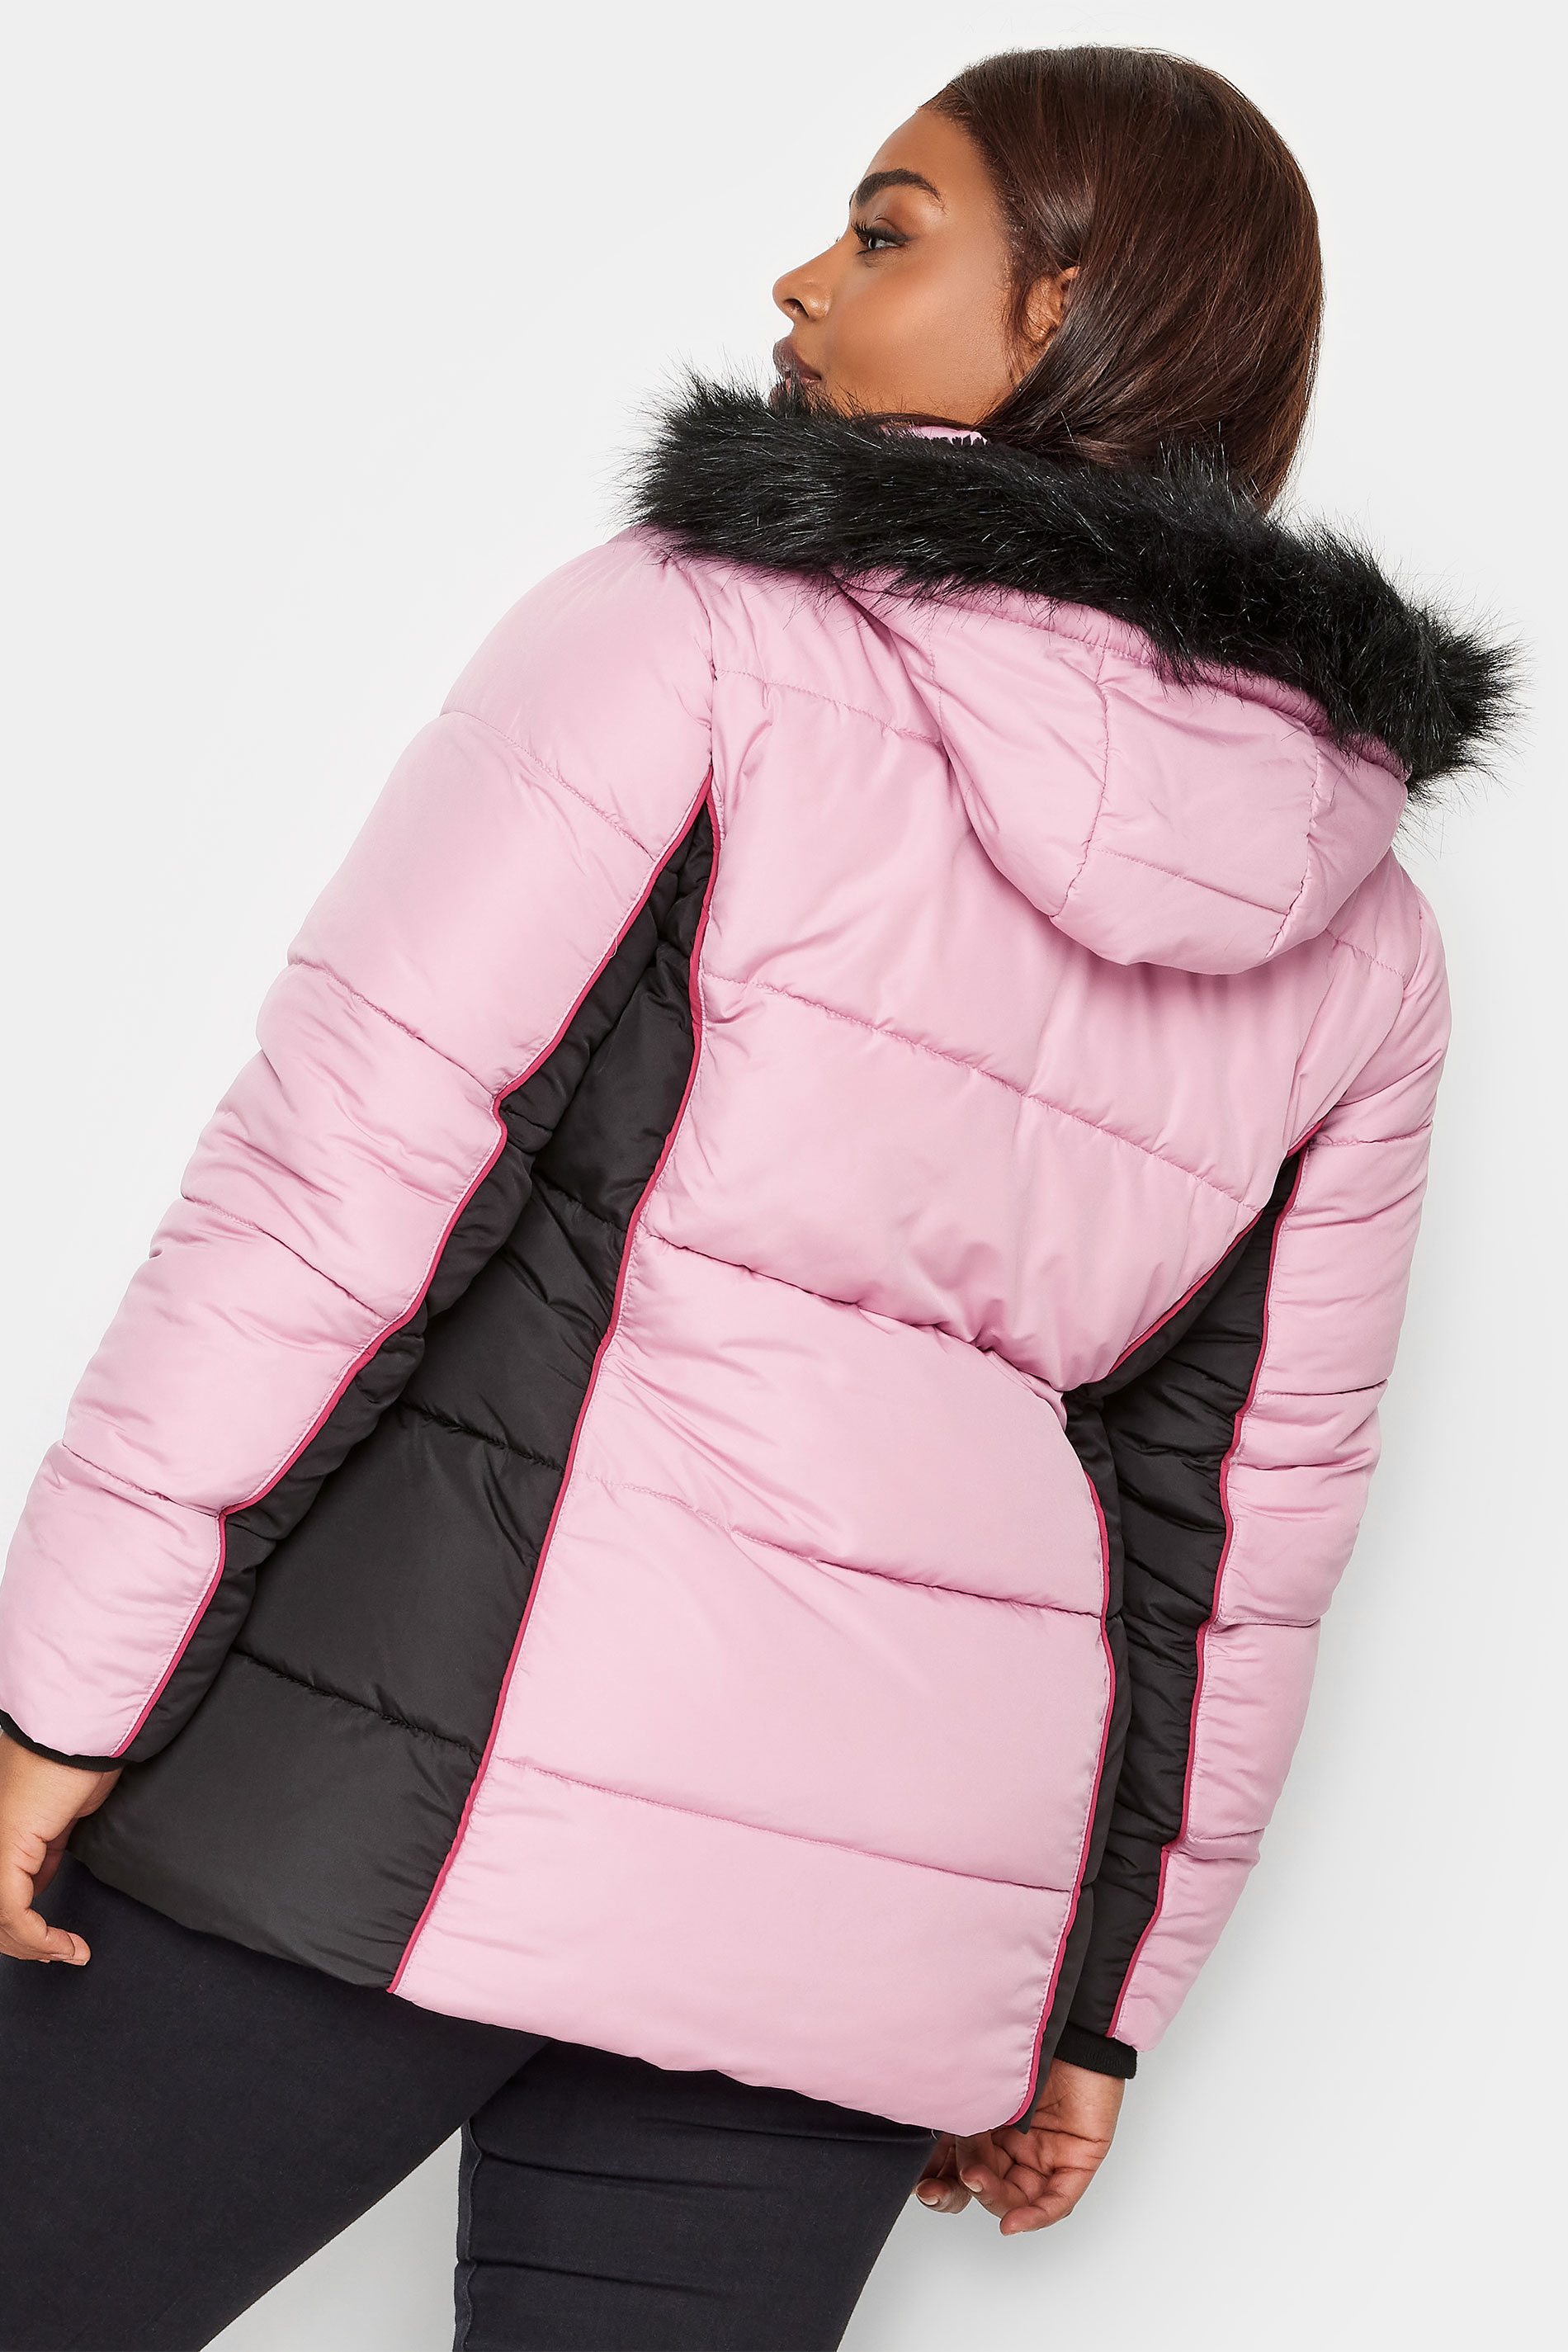 YOURS Plus Size Pink & Black Colourblock Hooded Puffer Jacket | YOURS ...